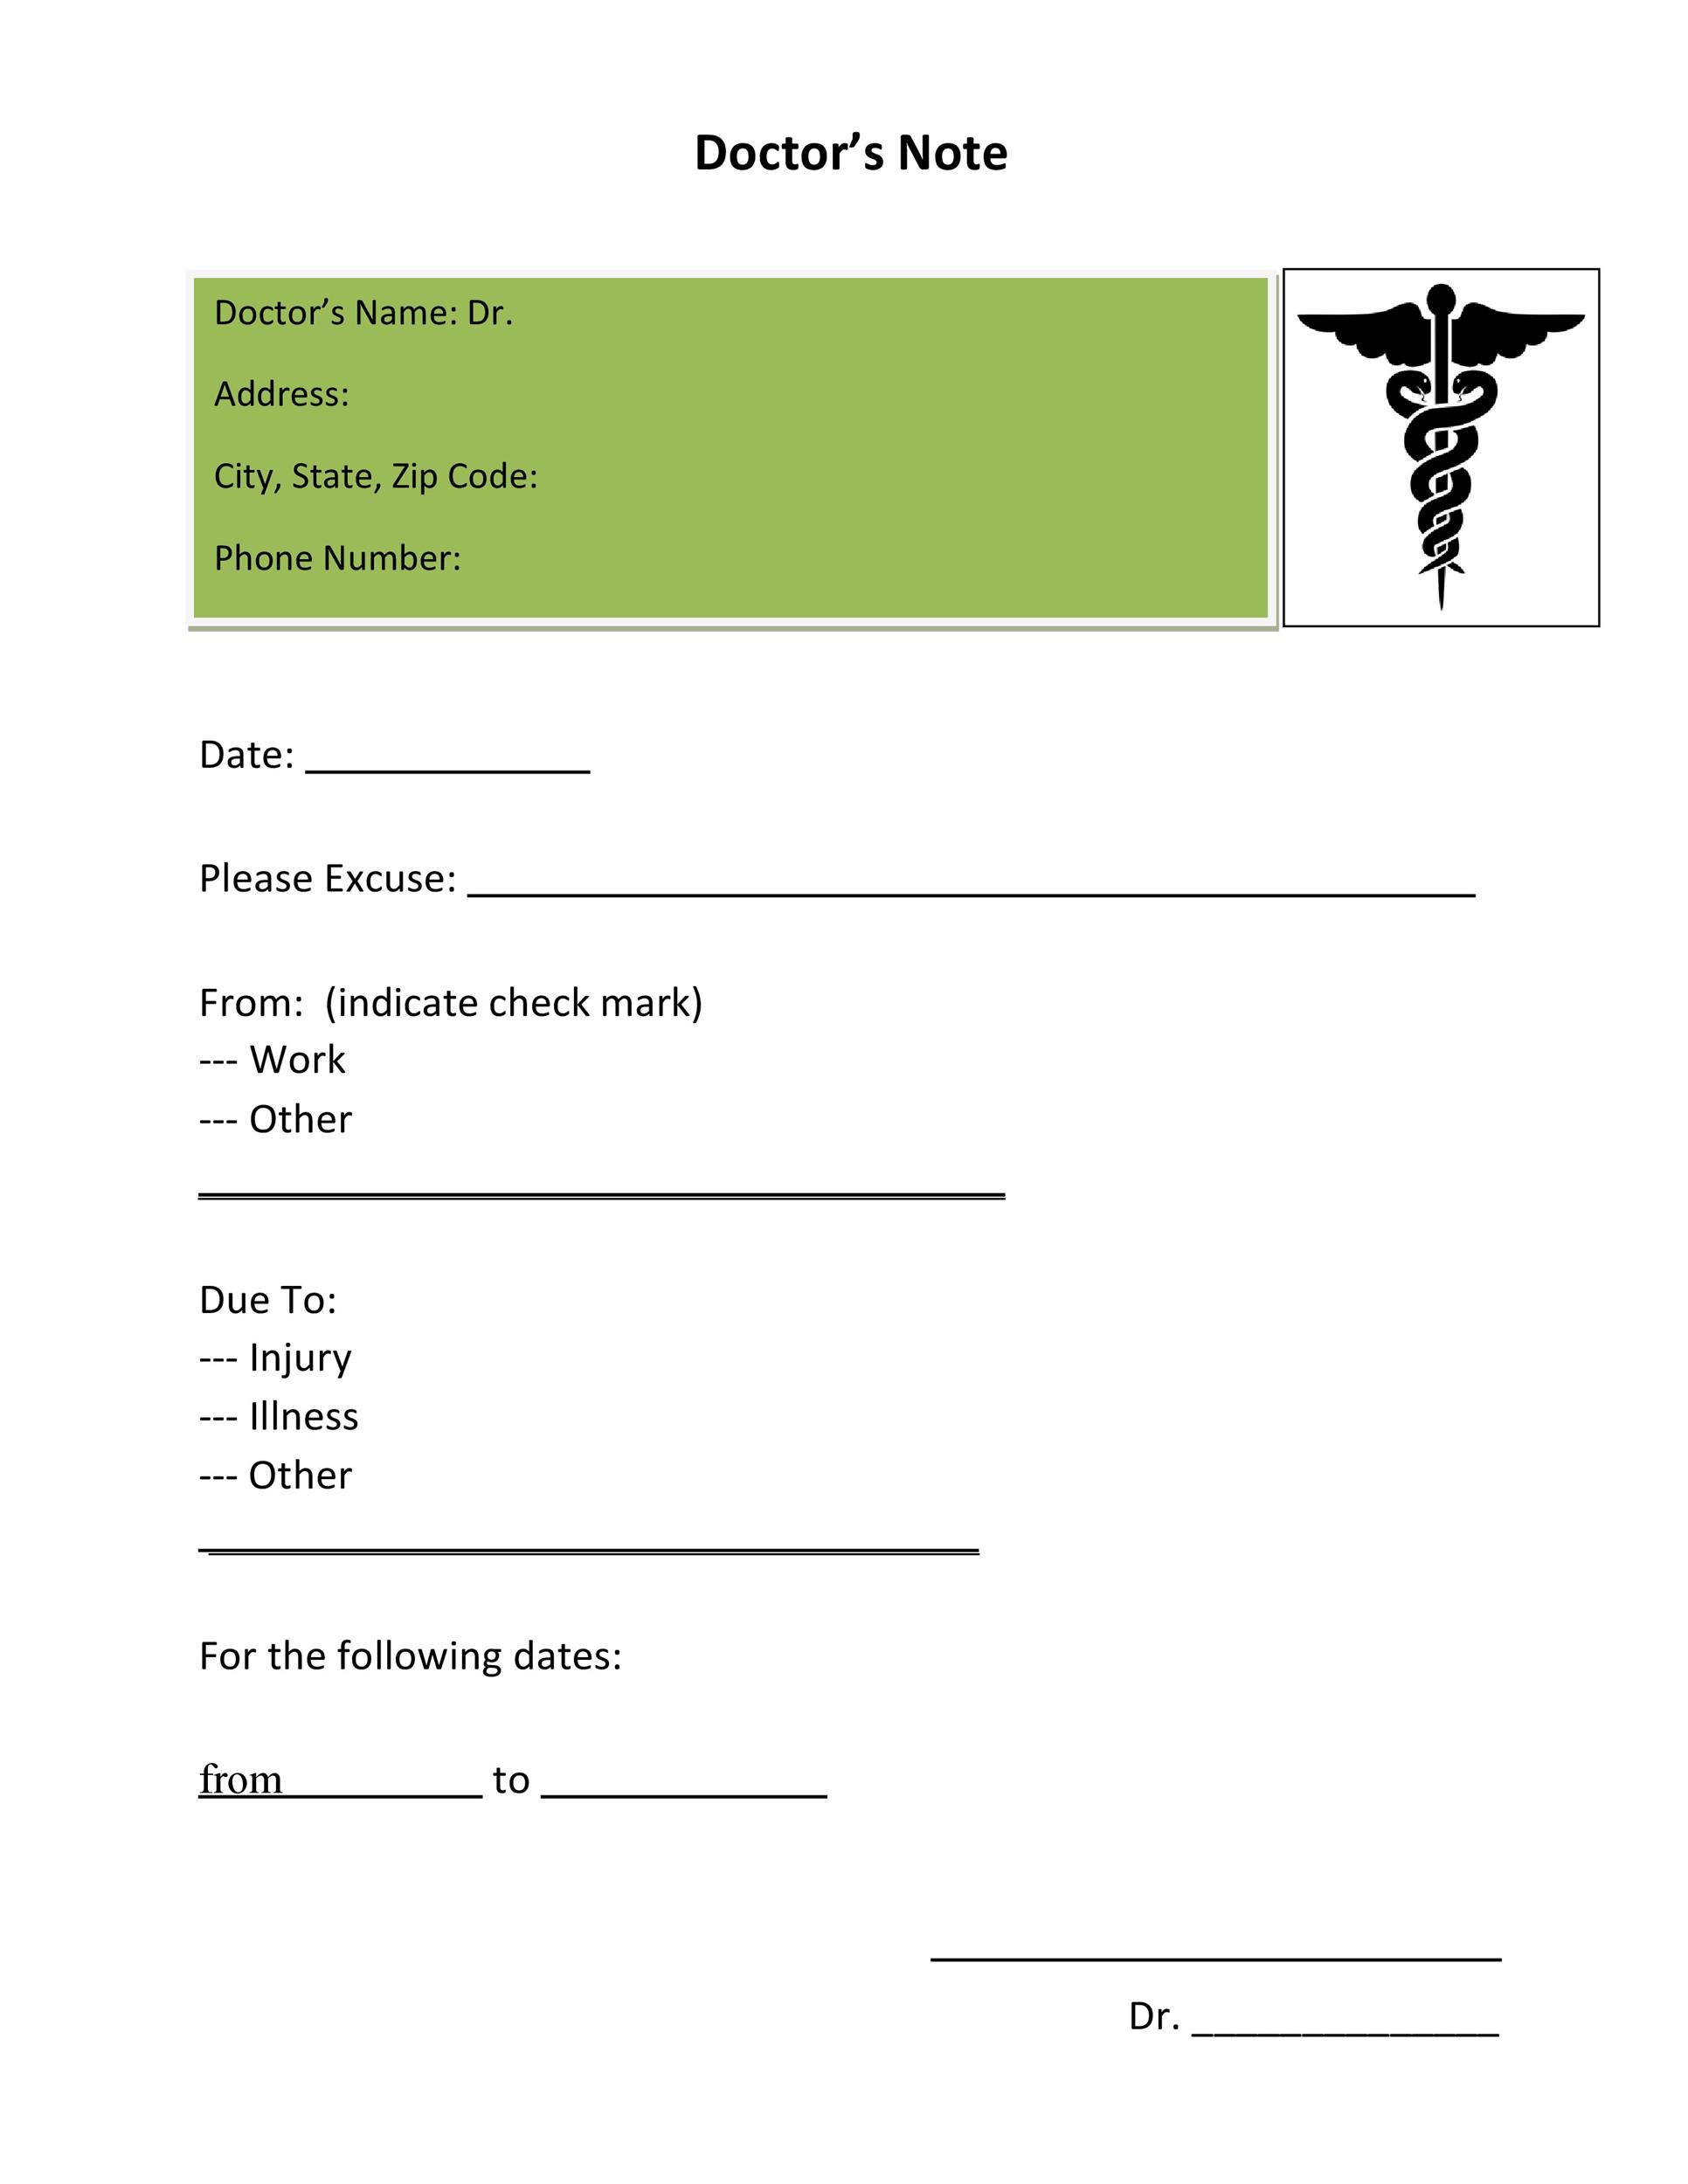 25+ Free Doctor Note / Excuse Templates ᐅ TemplateLab